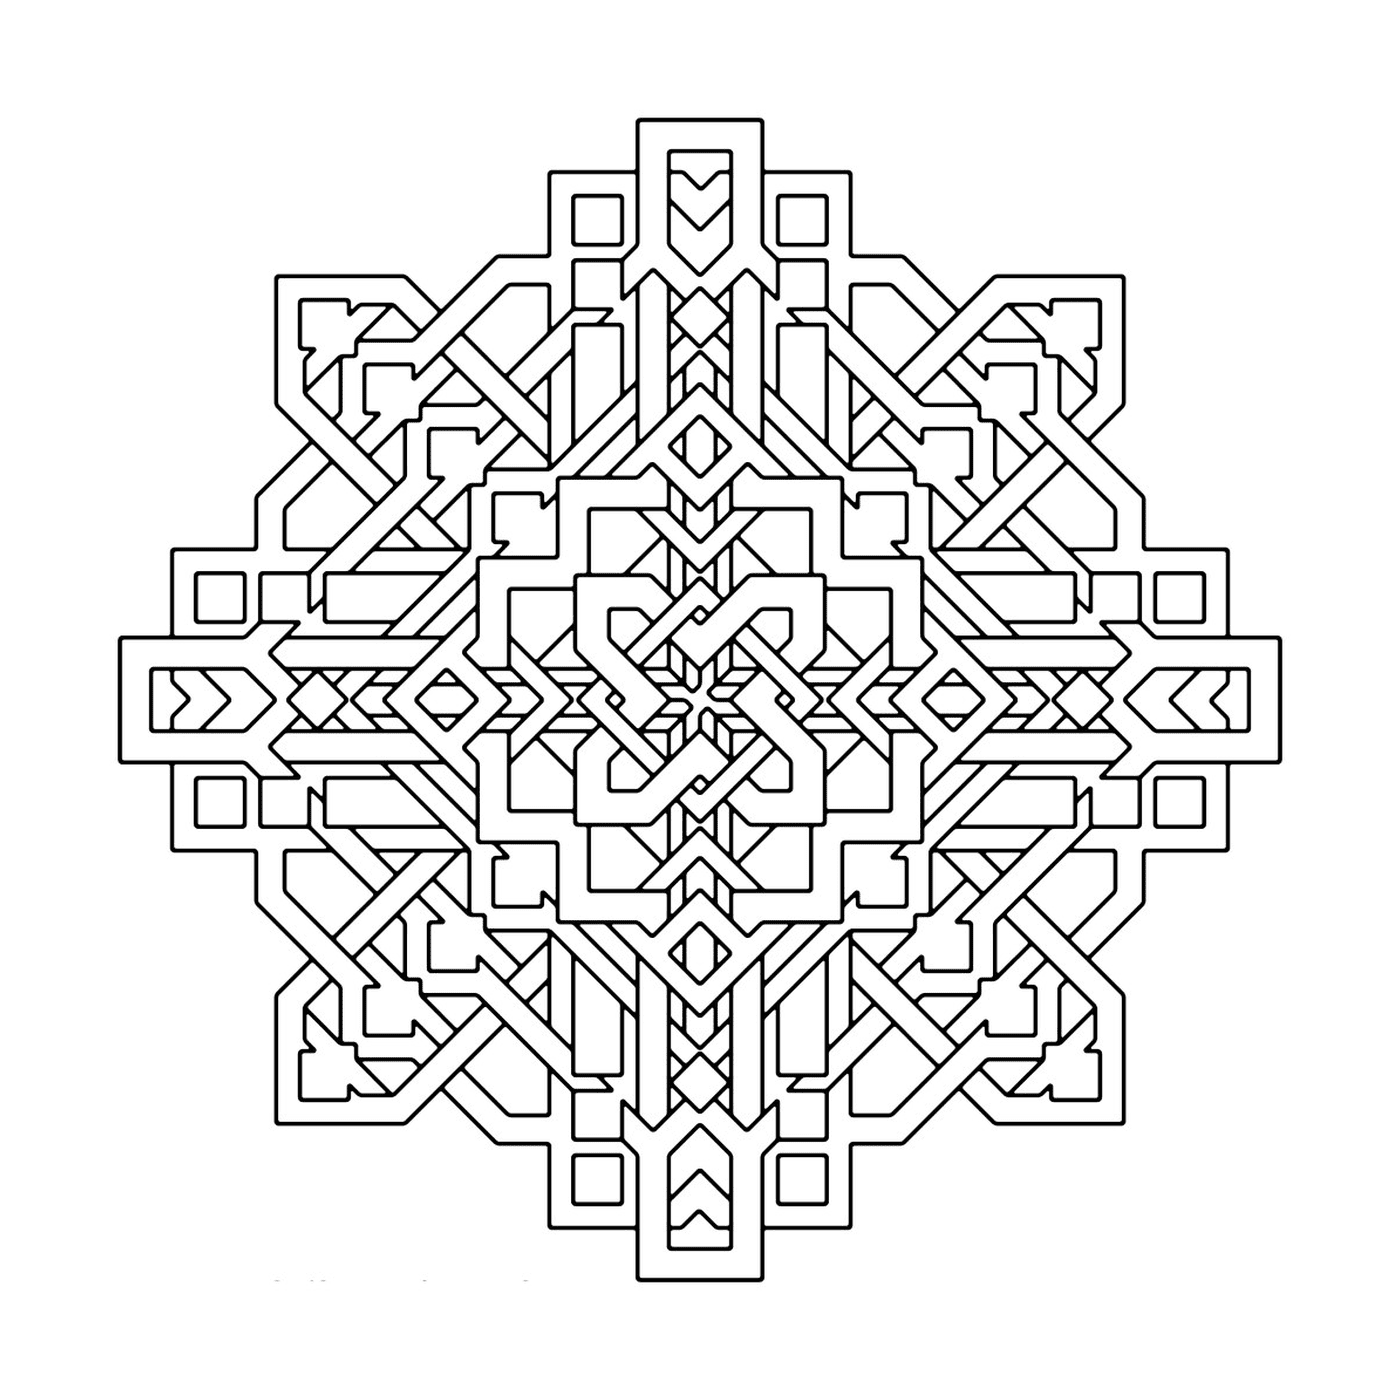  A complex and detailed geometric pattern 